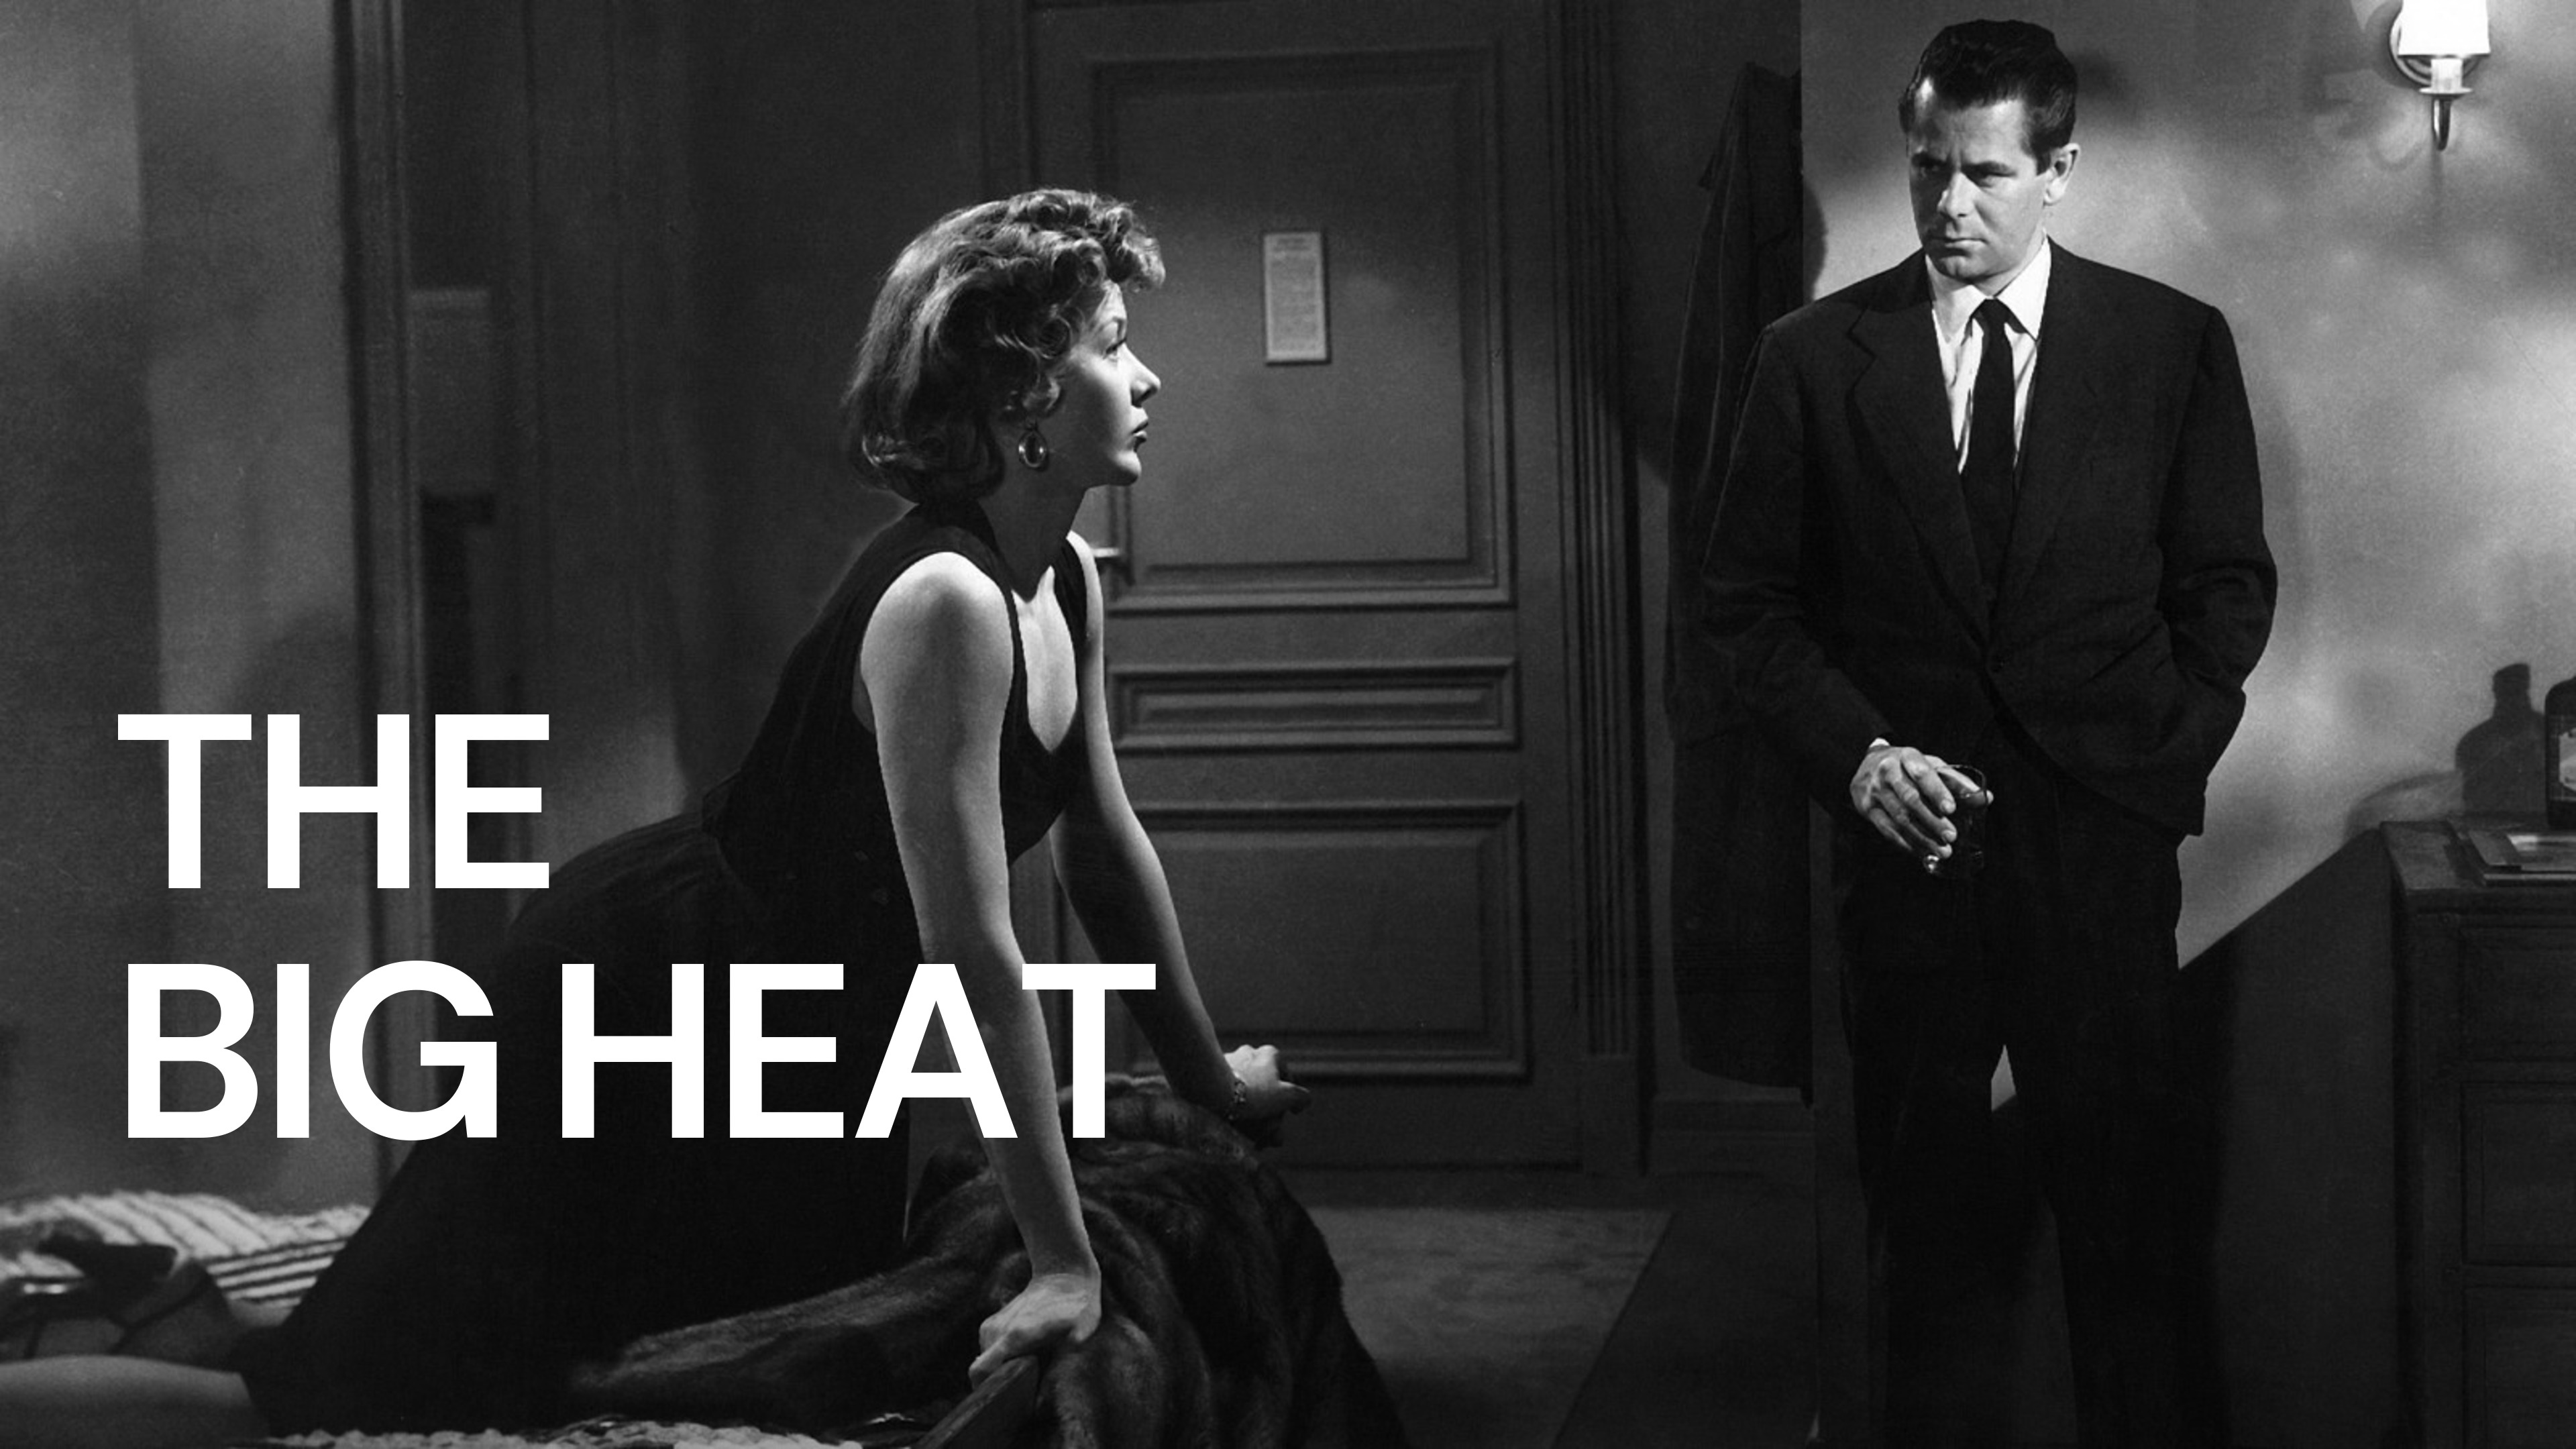 33-facts-about-the-movie-the-big-heat